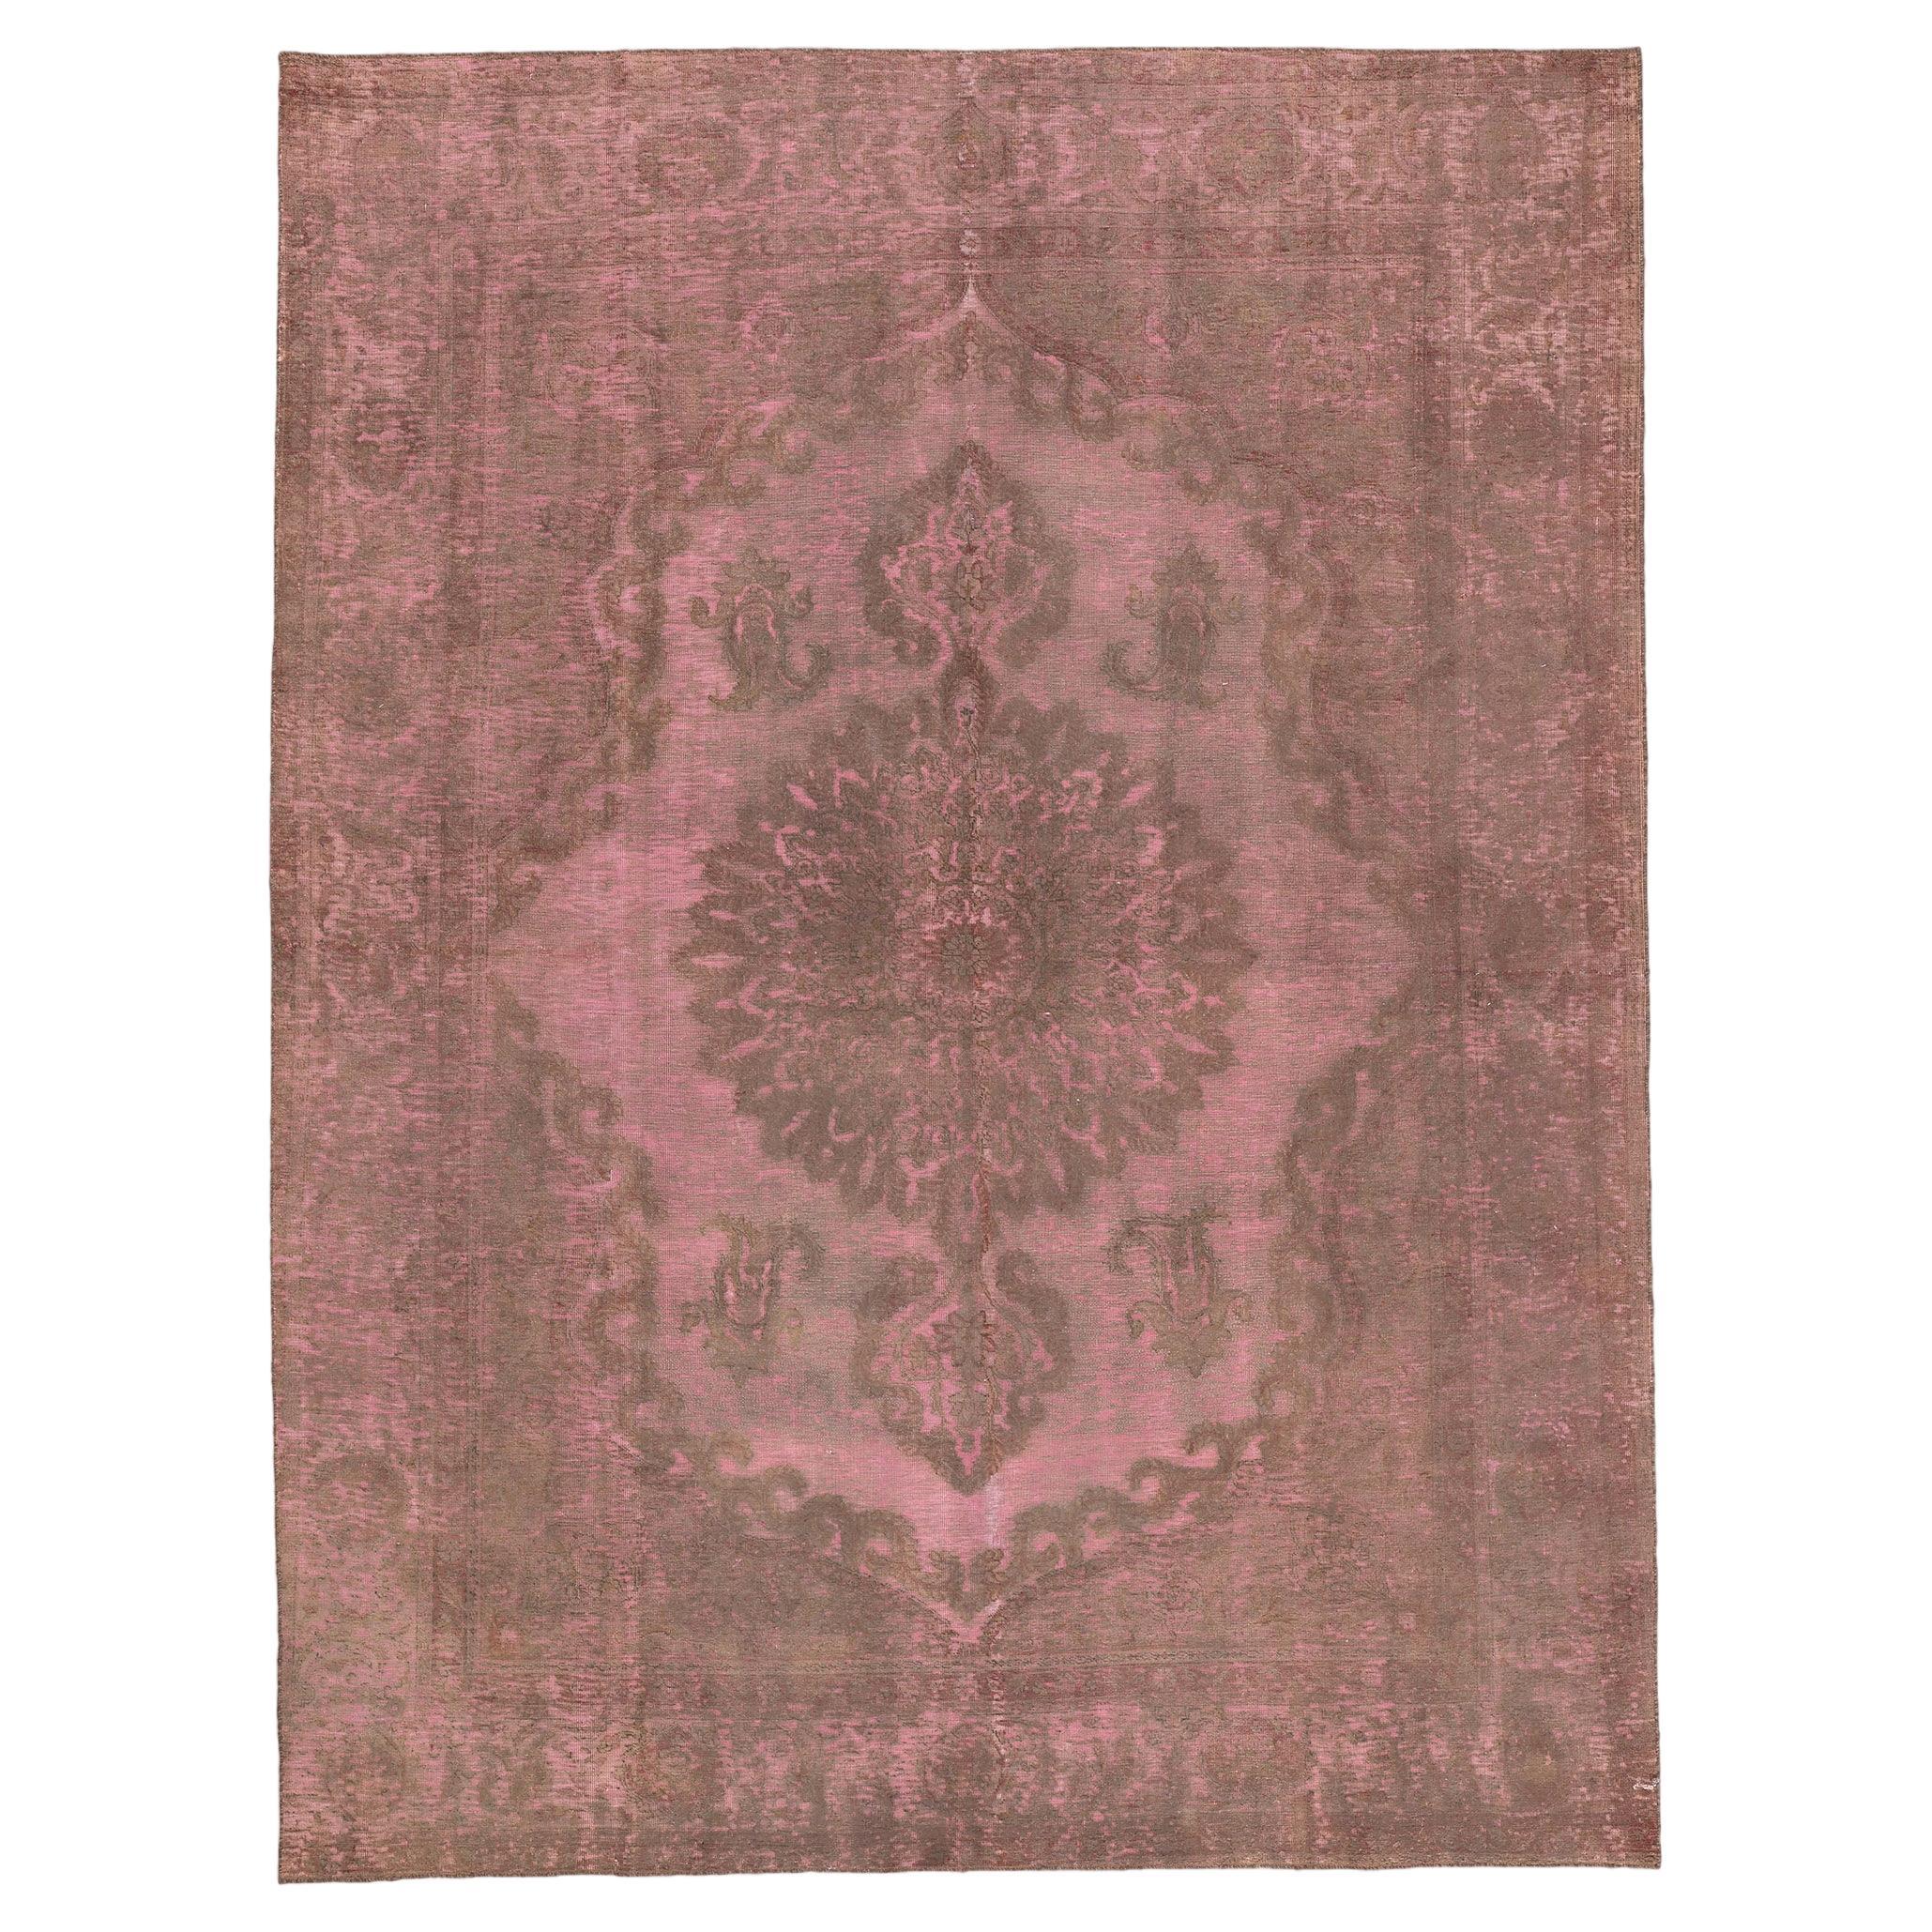 Vintage Turkish Overdyed Rug, Romantic Boho Meets Modern Industrial For Sale